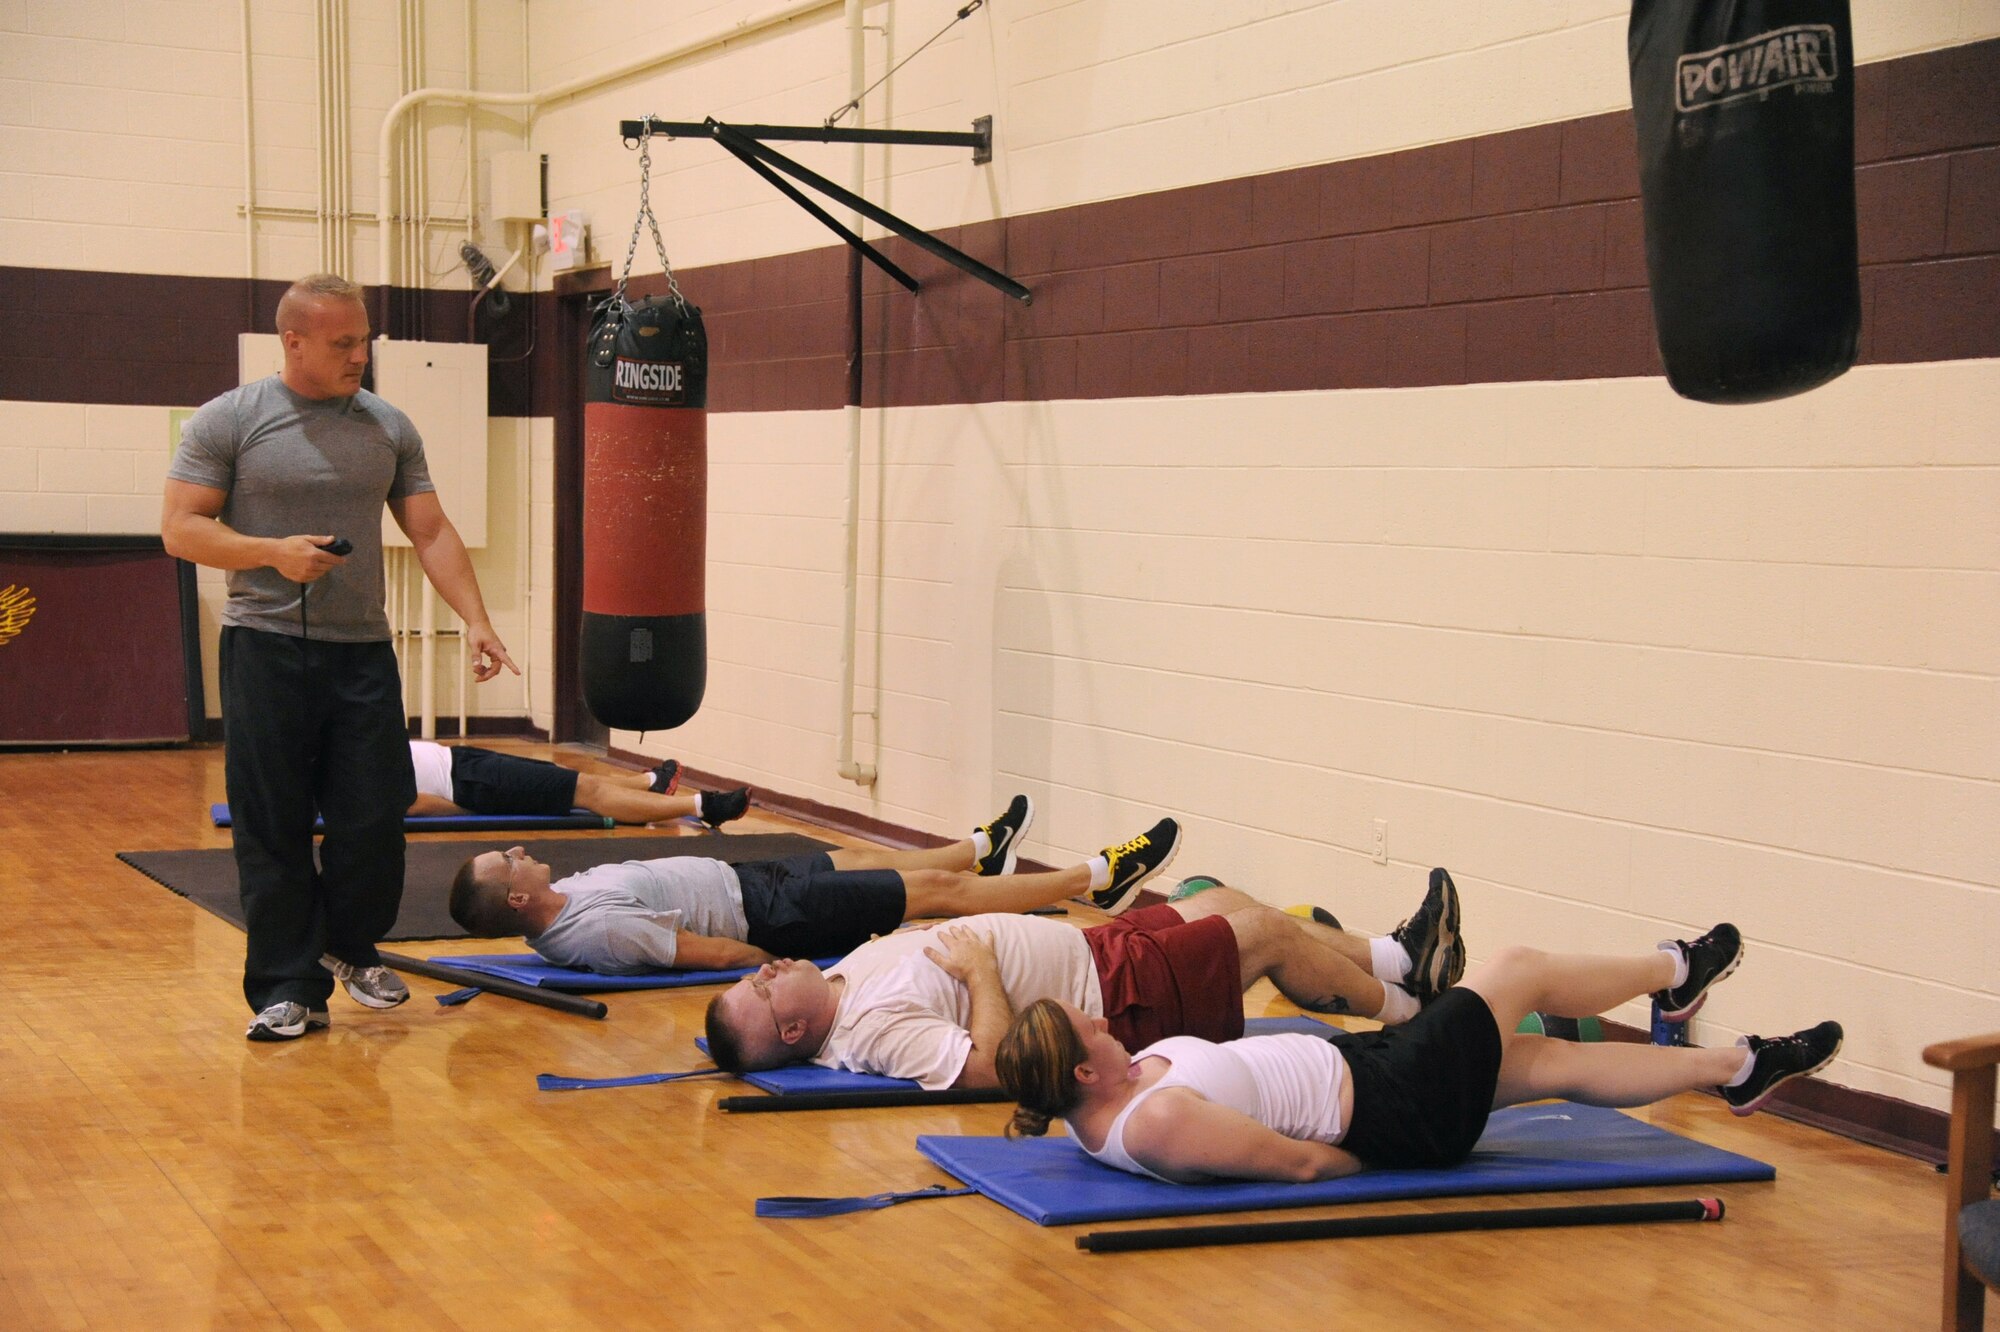 SEYMOUR JOHNSON AIR FORCE BASE, N.C.- Michael Unden, 4th Force Support Squadron military fitness specialist, observes students during a boot camp class here Aug. 15, 2011. Unden informs his students that slow, controlled movements allows for better contractions and quicker results for the abdominal and core muscles.  Unden is a native of Wichita, Kan. (U.S. Air Force photo by Senior Airman Whitney Lambert/Released)